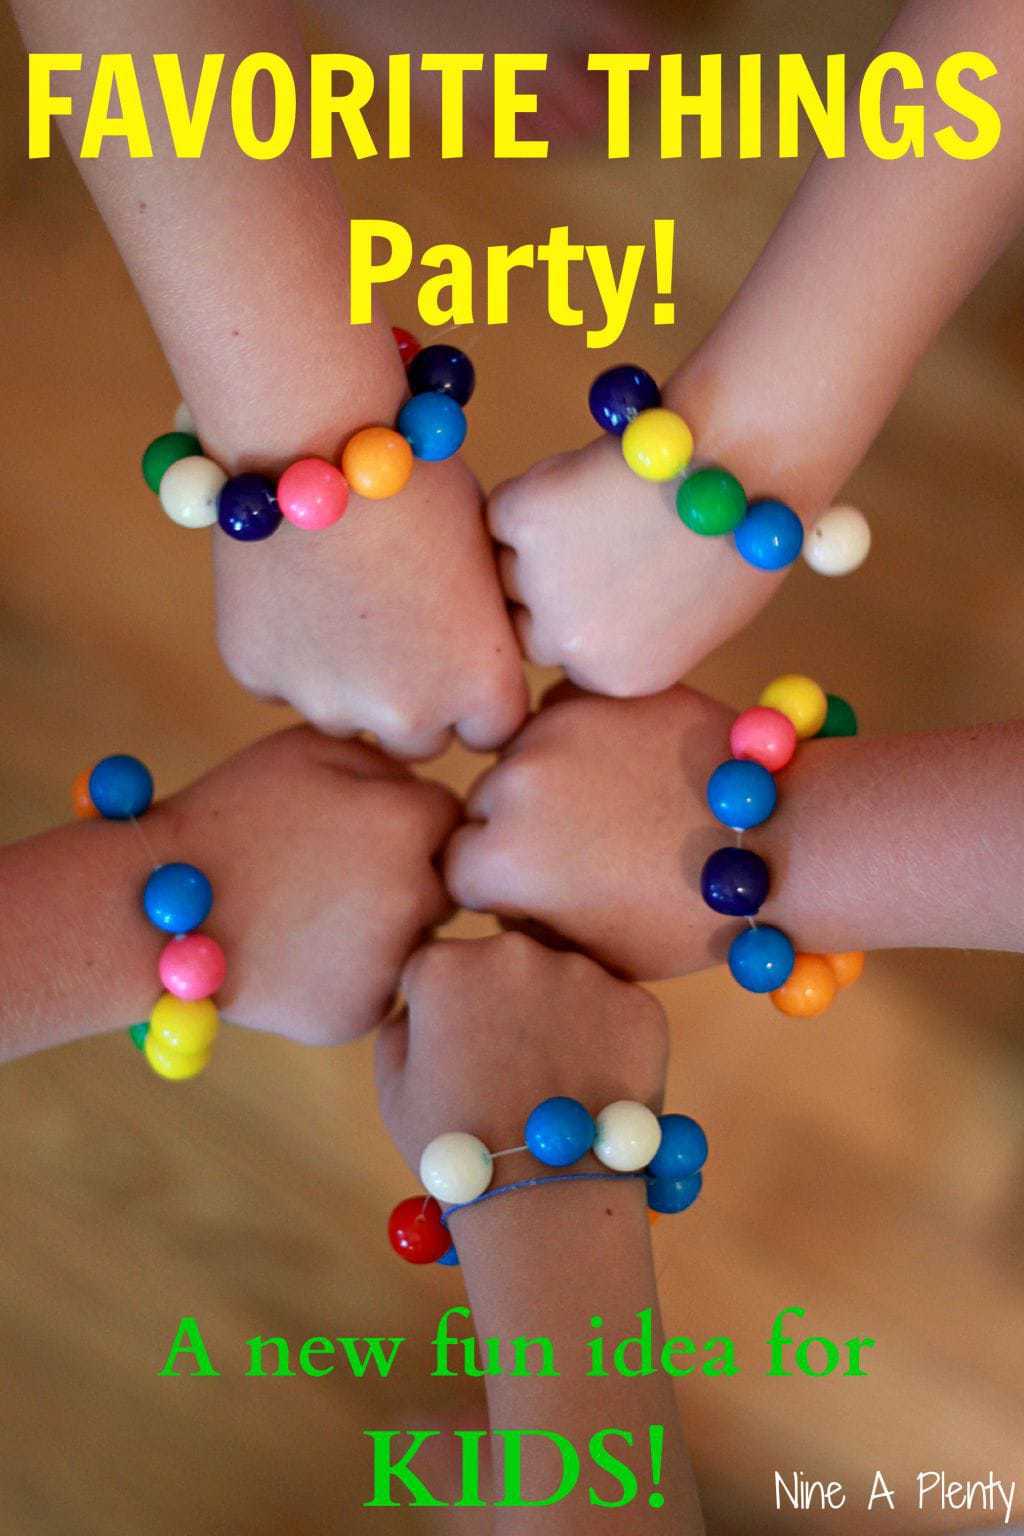 Teen Party Favors That They'll Use and are Inexpensive! - Leap of Faith  Crafting